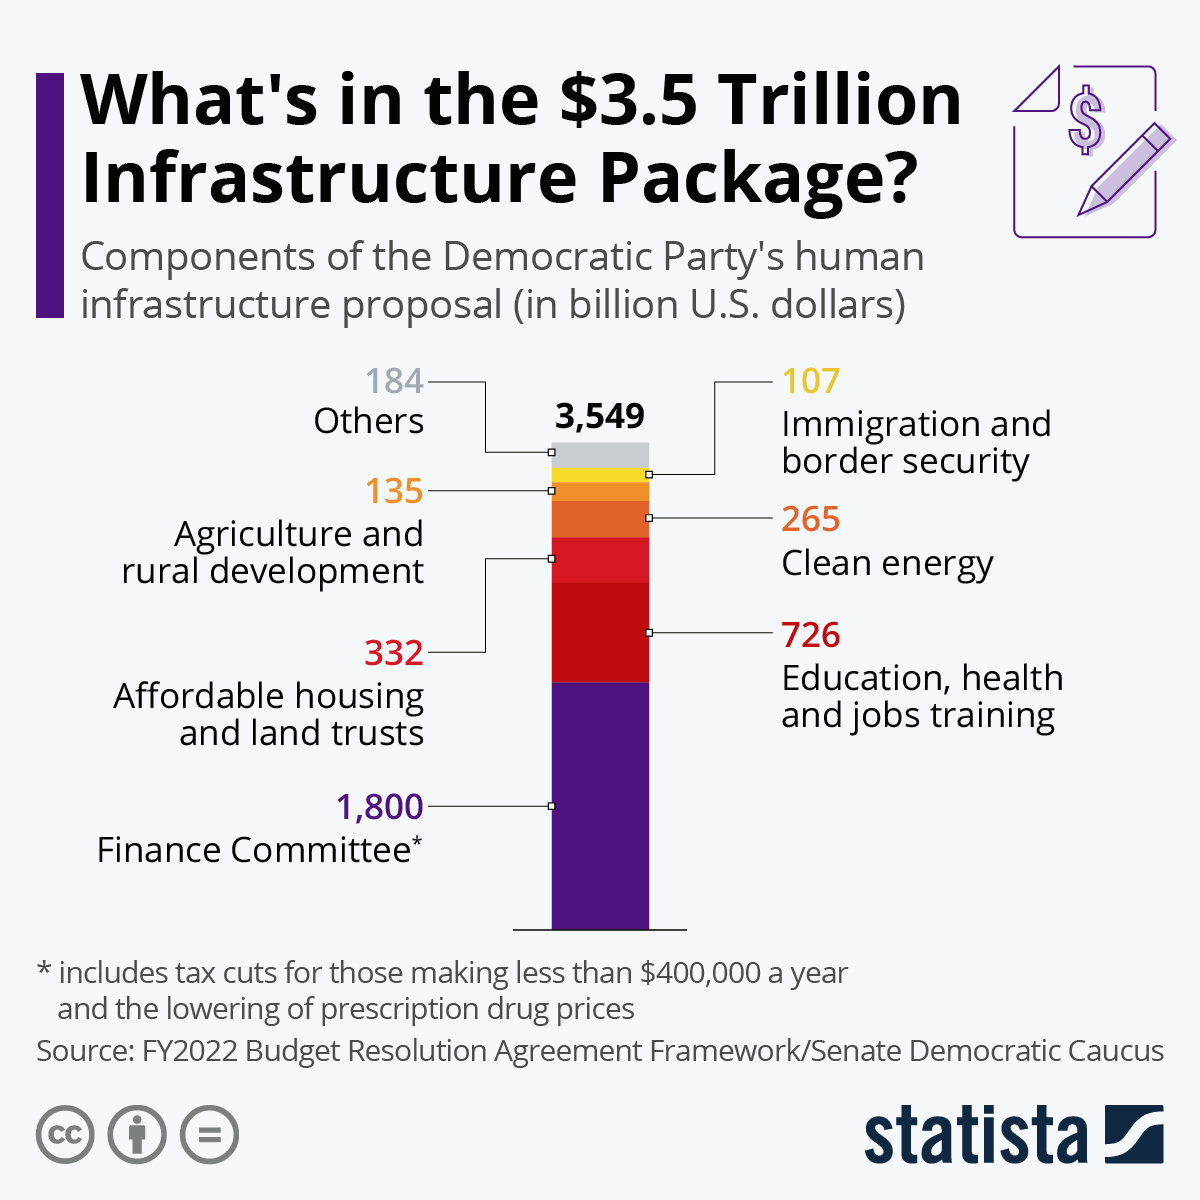 What's in the $3.5 Trillion Infrastructure Package?